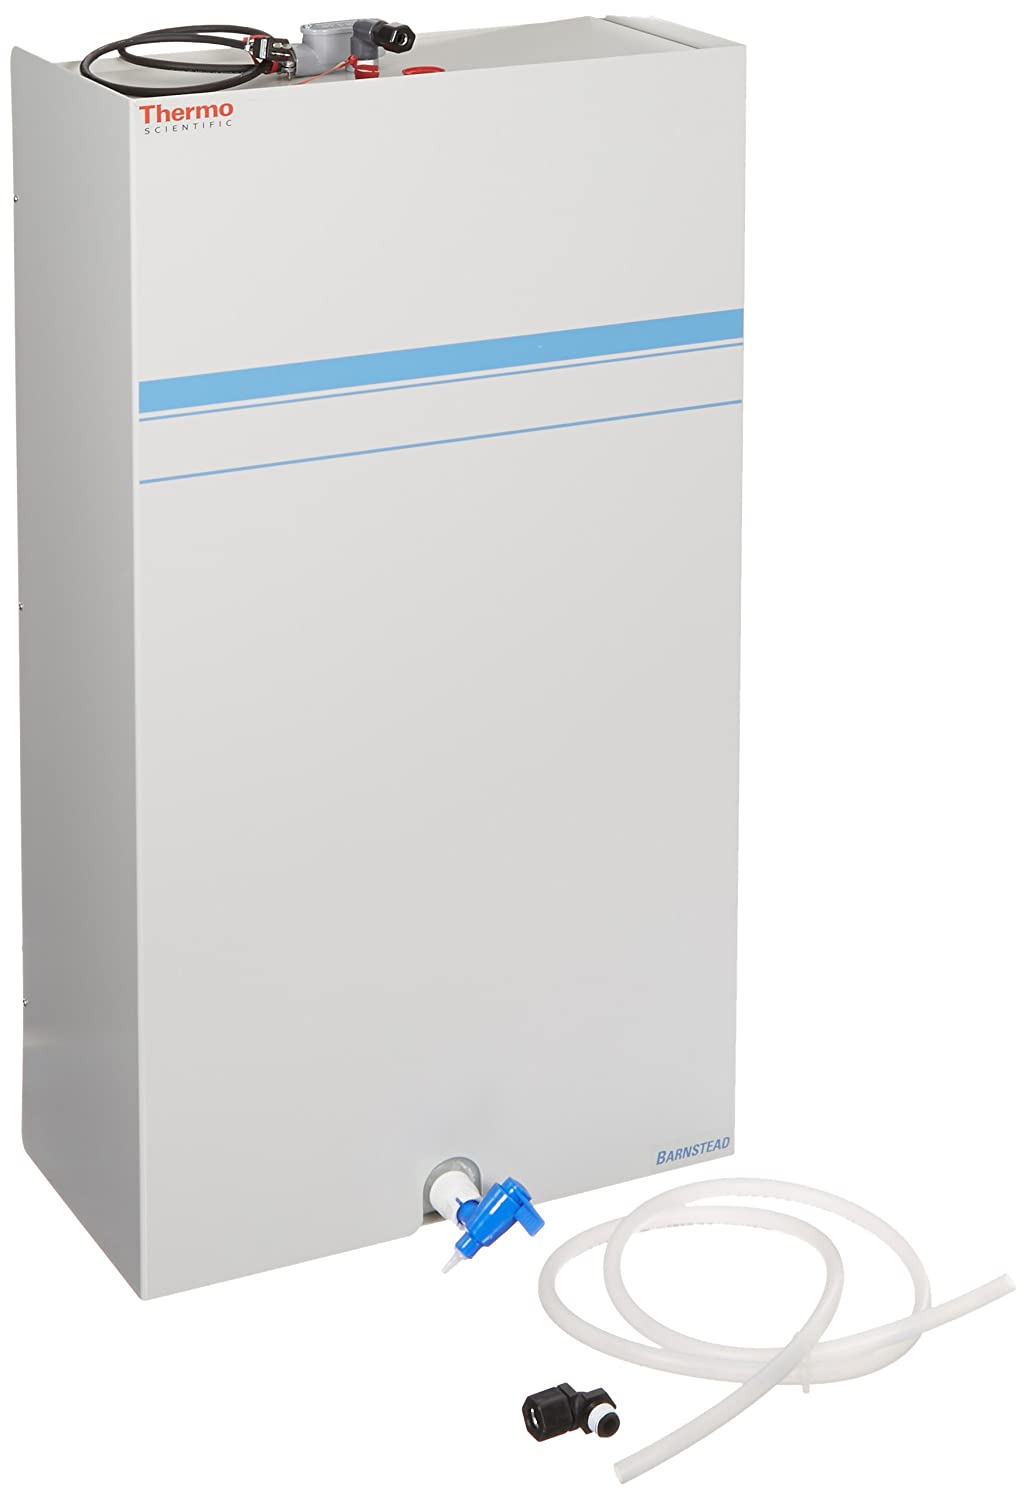 D2622-USED  - Thermo Scientific Barnstead Reverse Osmosis Storage Reservoir  100L Capacity